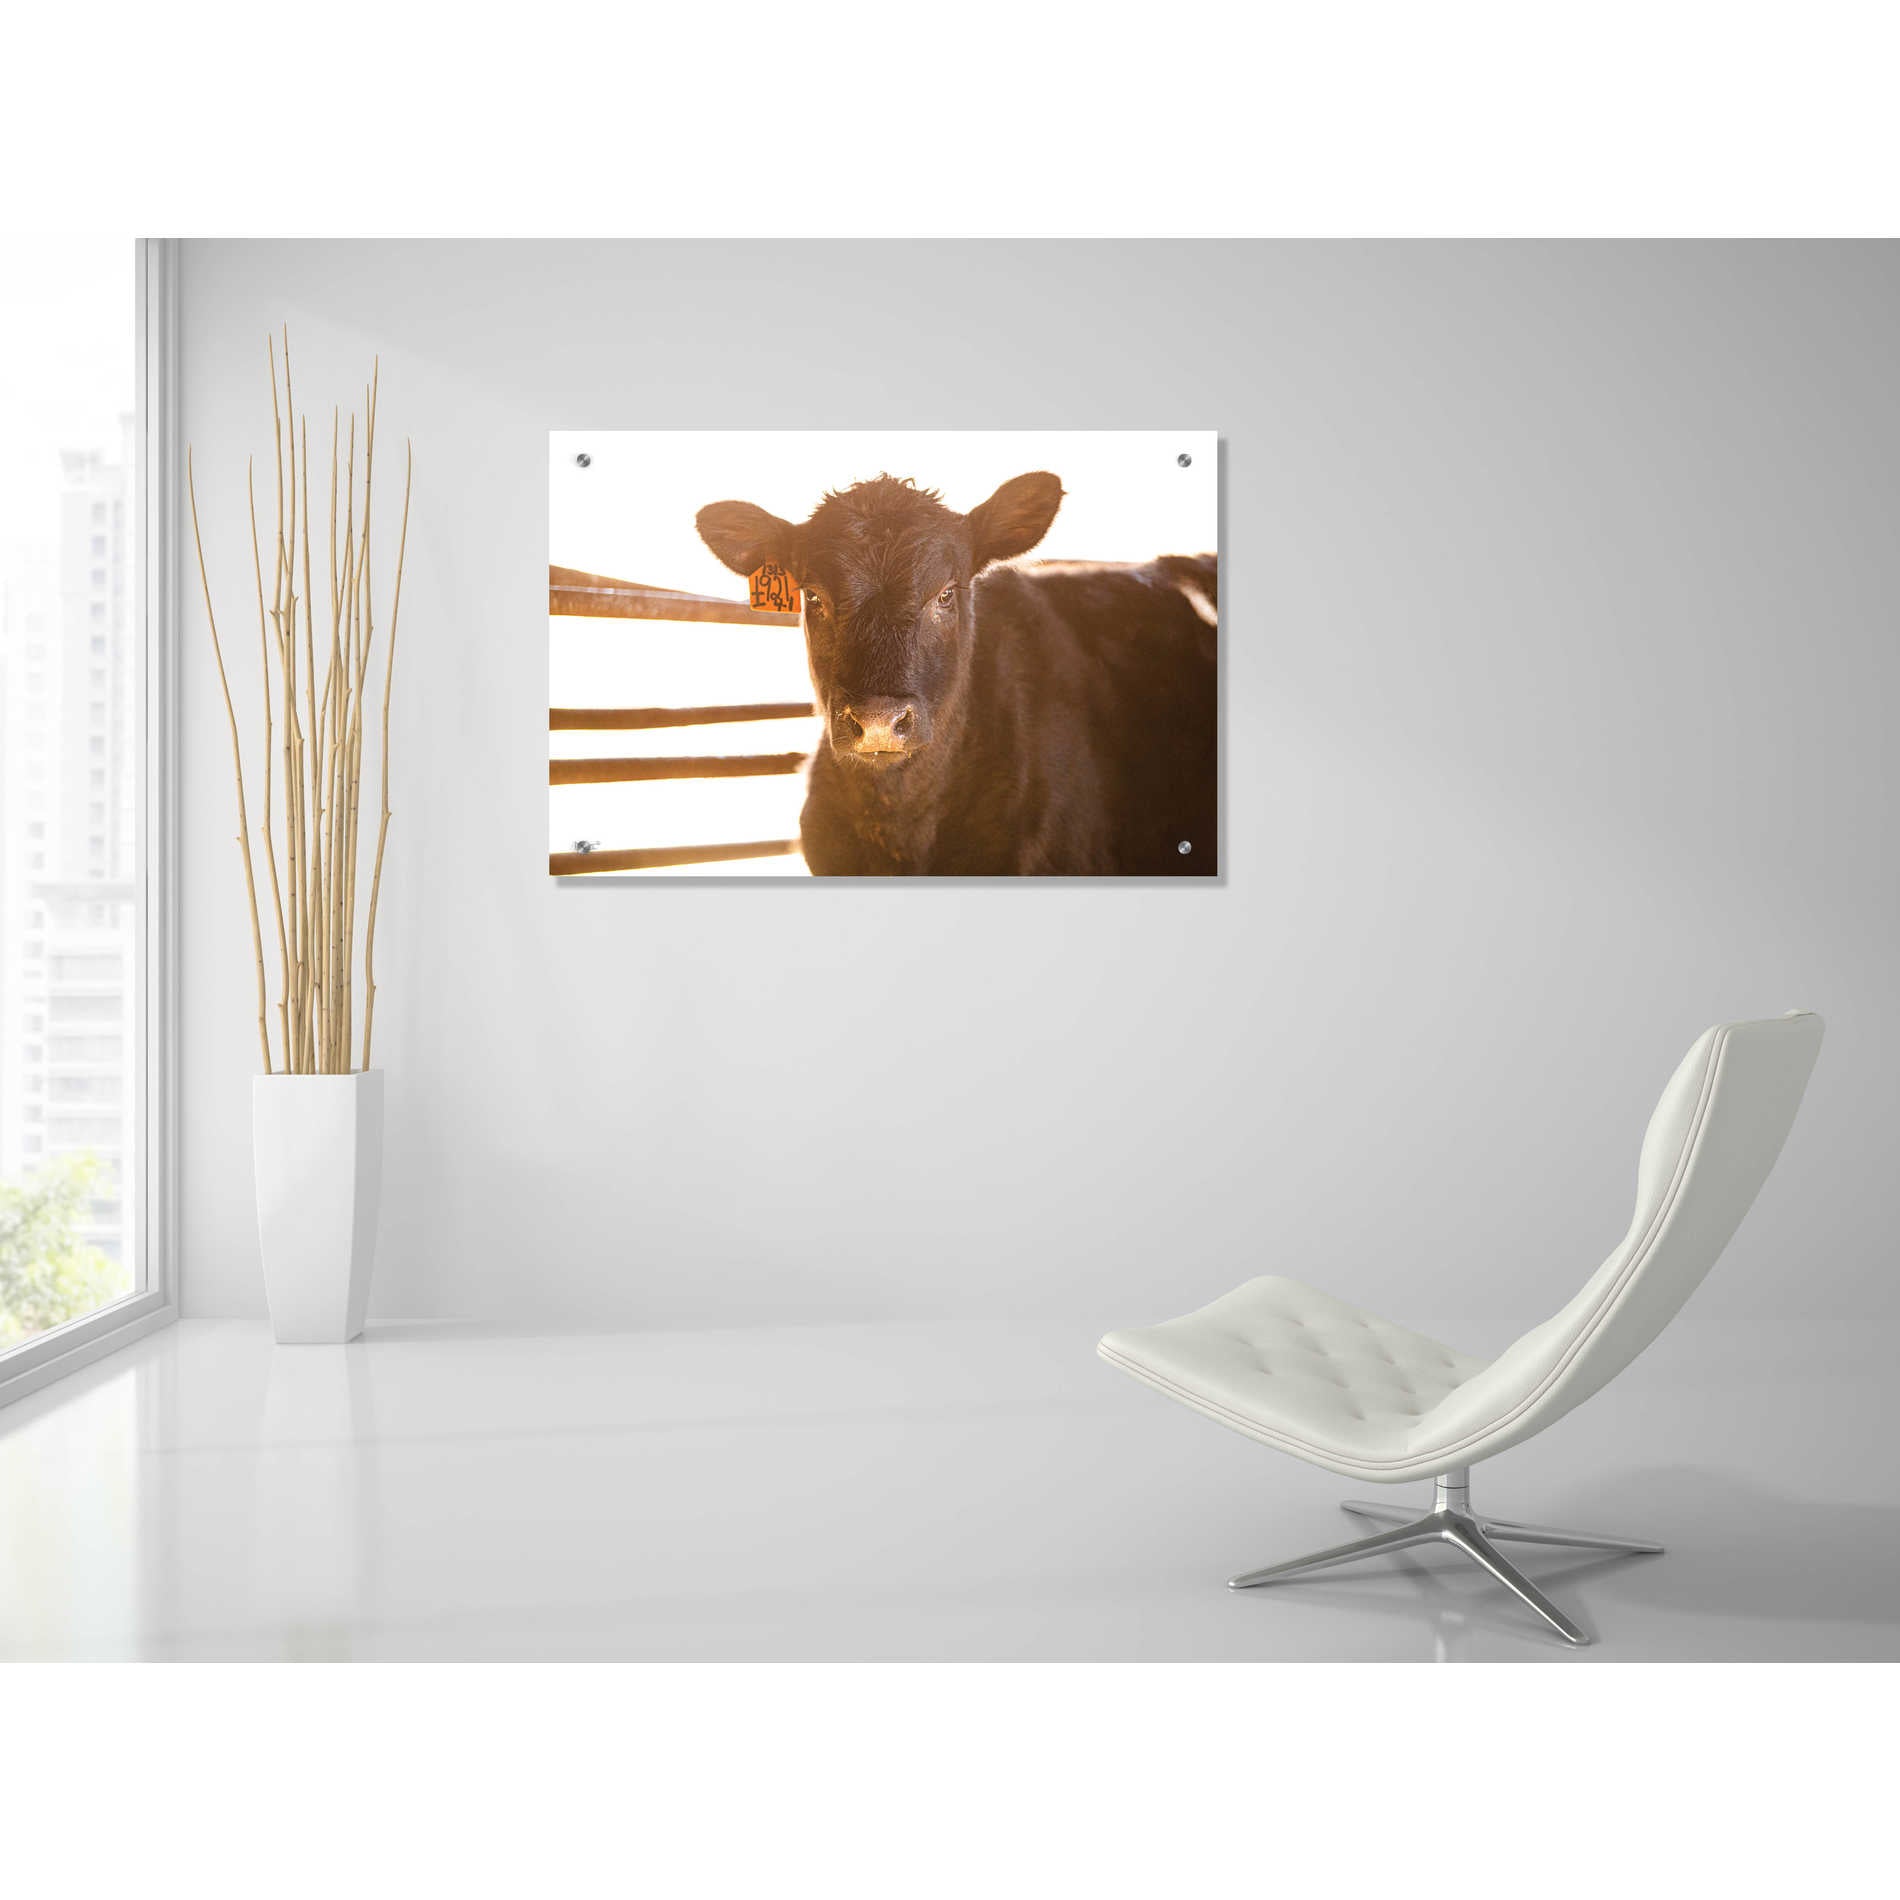 'Baby Cow II' by Donnie Quillen, Acrylic Wall Art,36x24